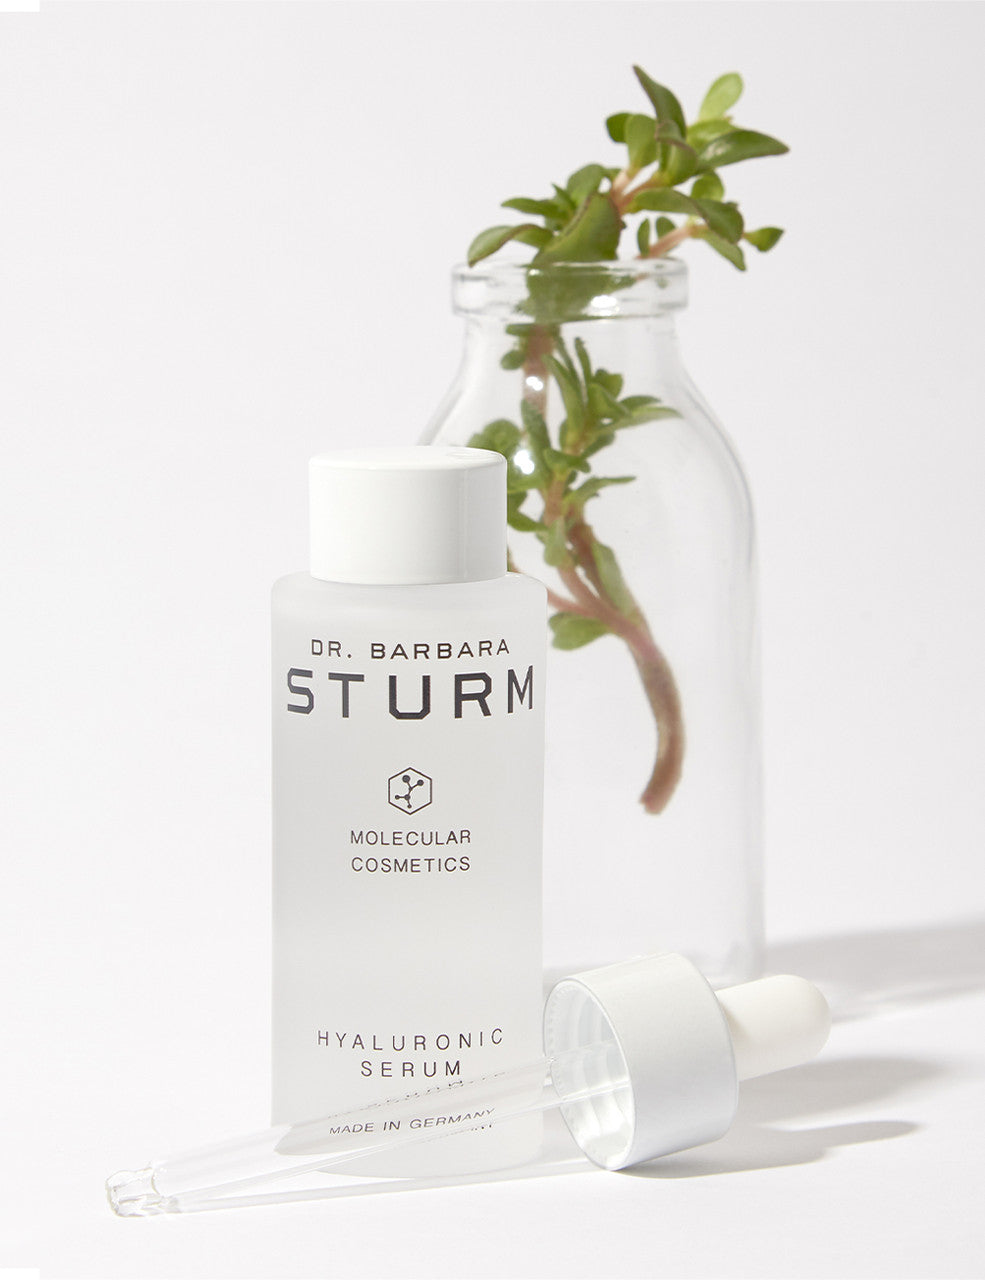 Dr. Sturm Hyaluronic Serum beside a plant in a jar